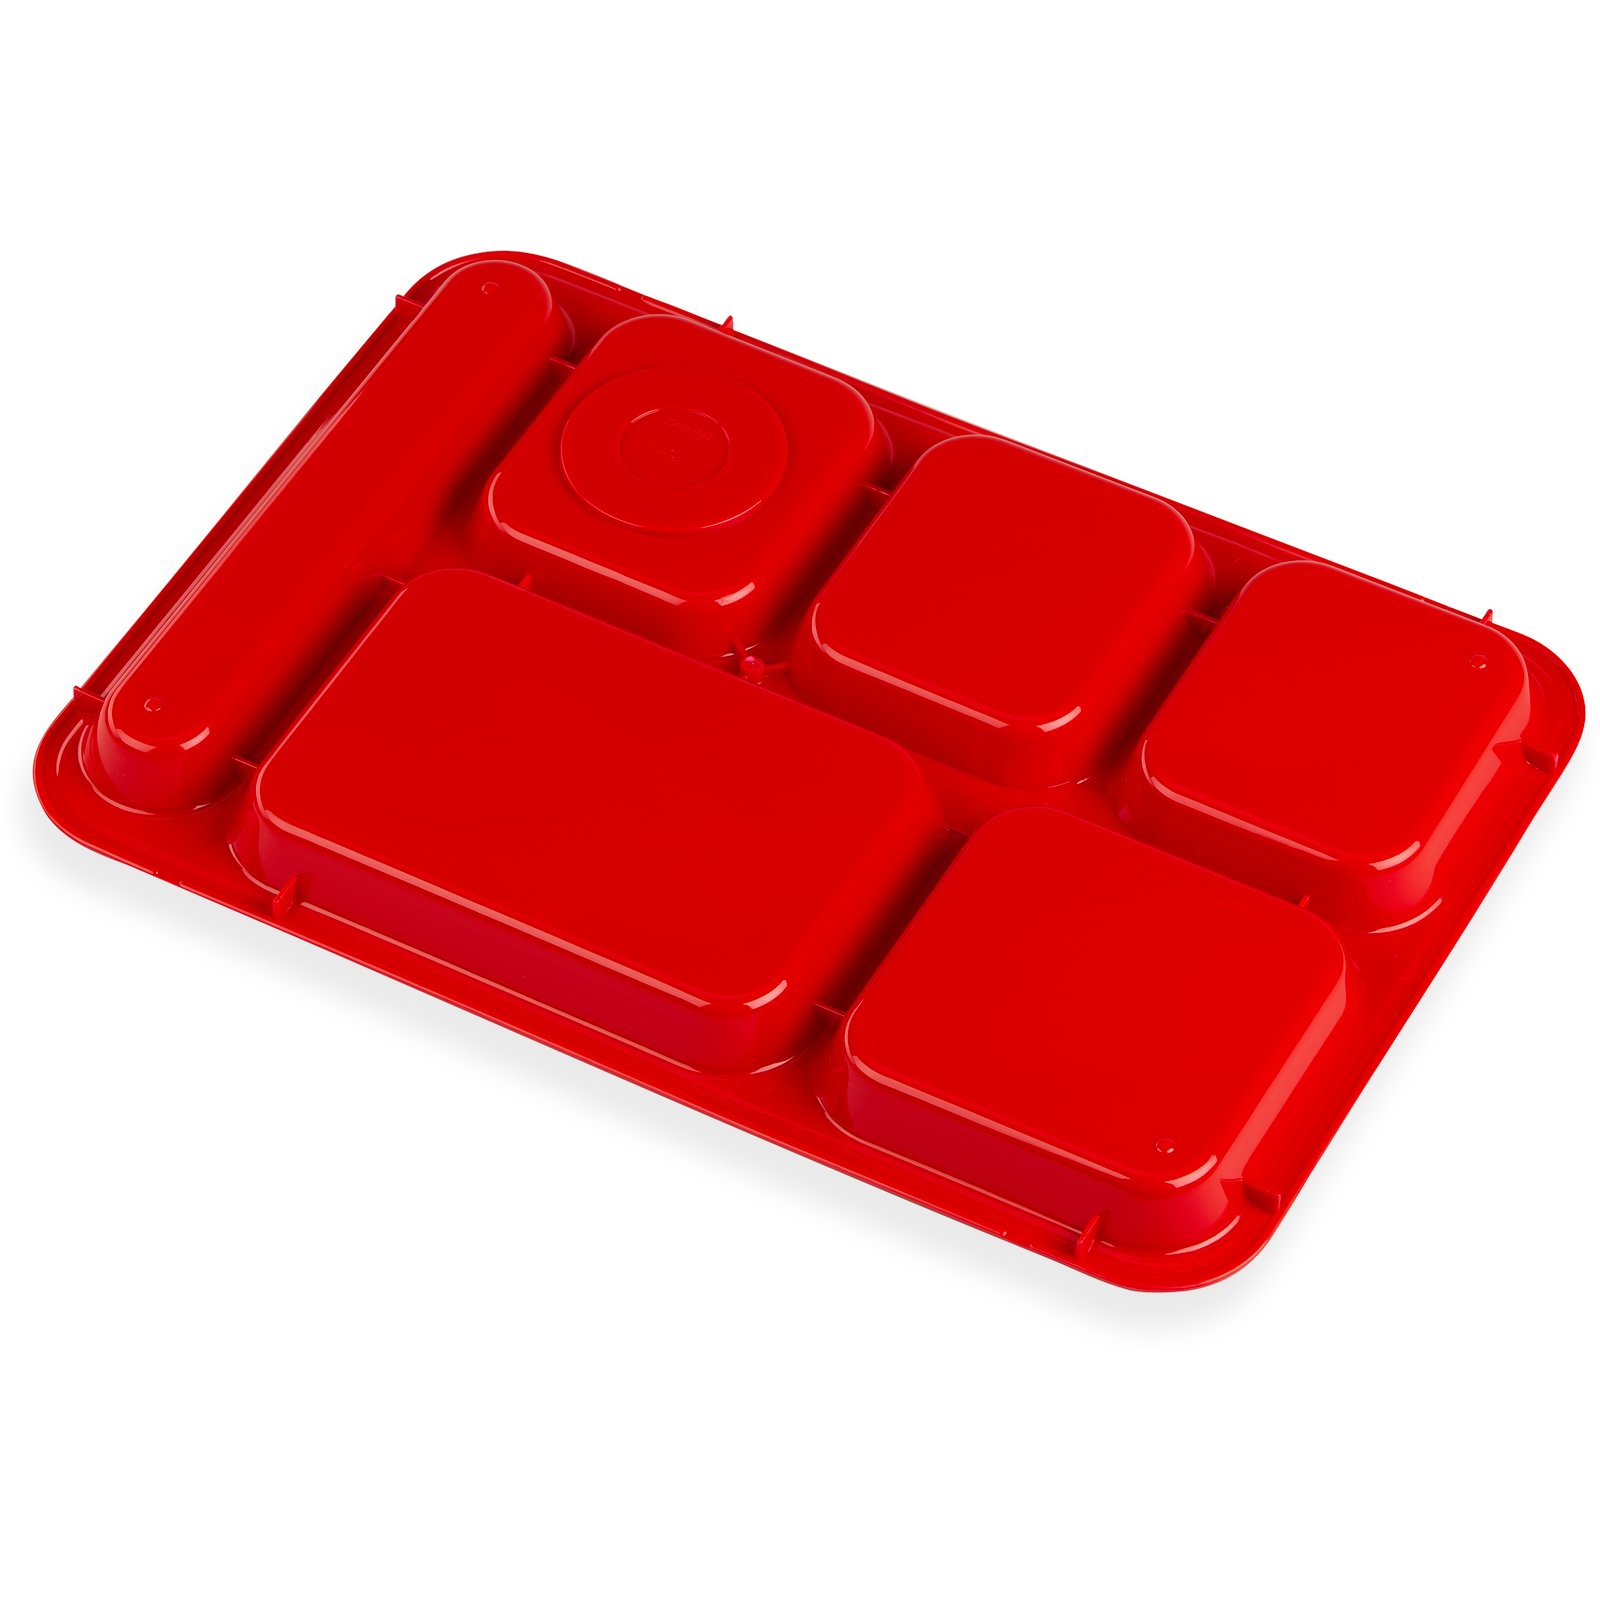 P614R05 - Right-Hand 6-Compartment Polypropylene Tray 10 x 14 - Red